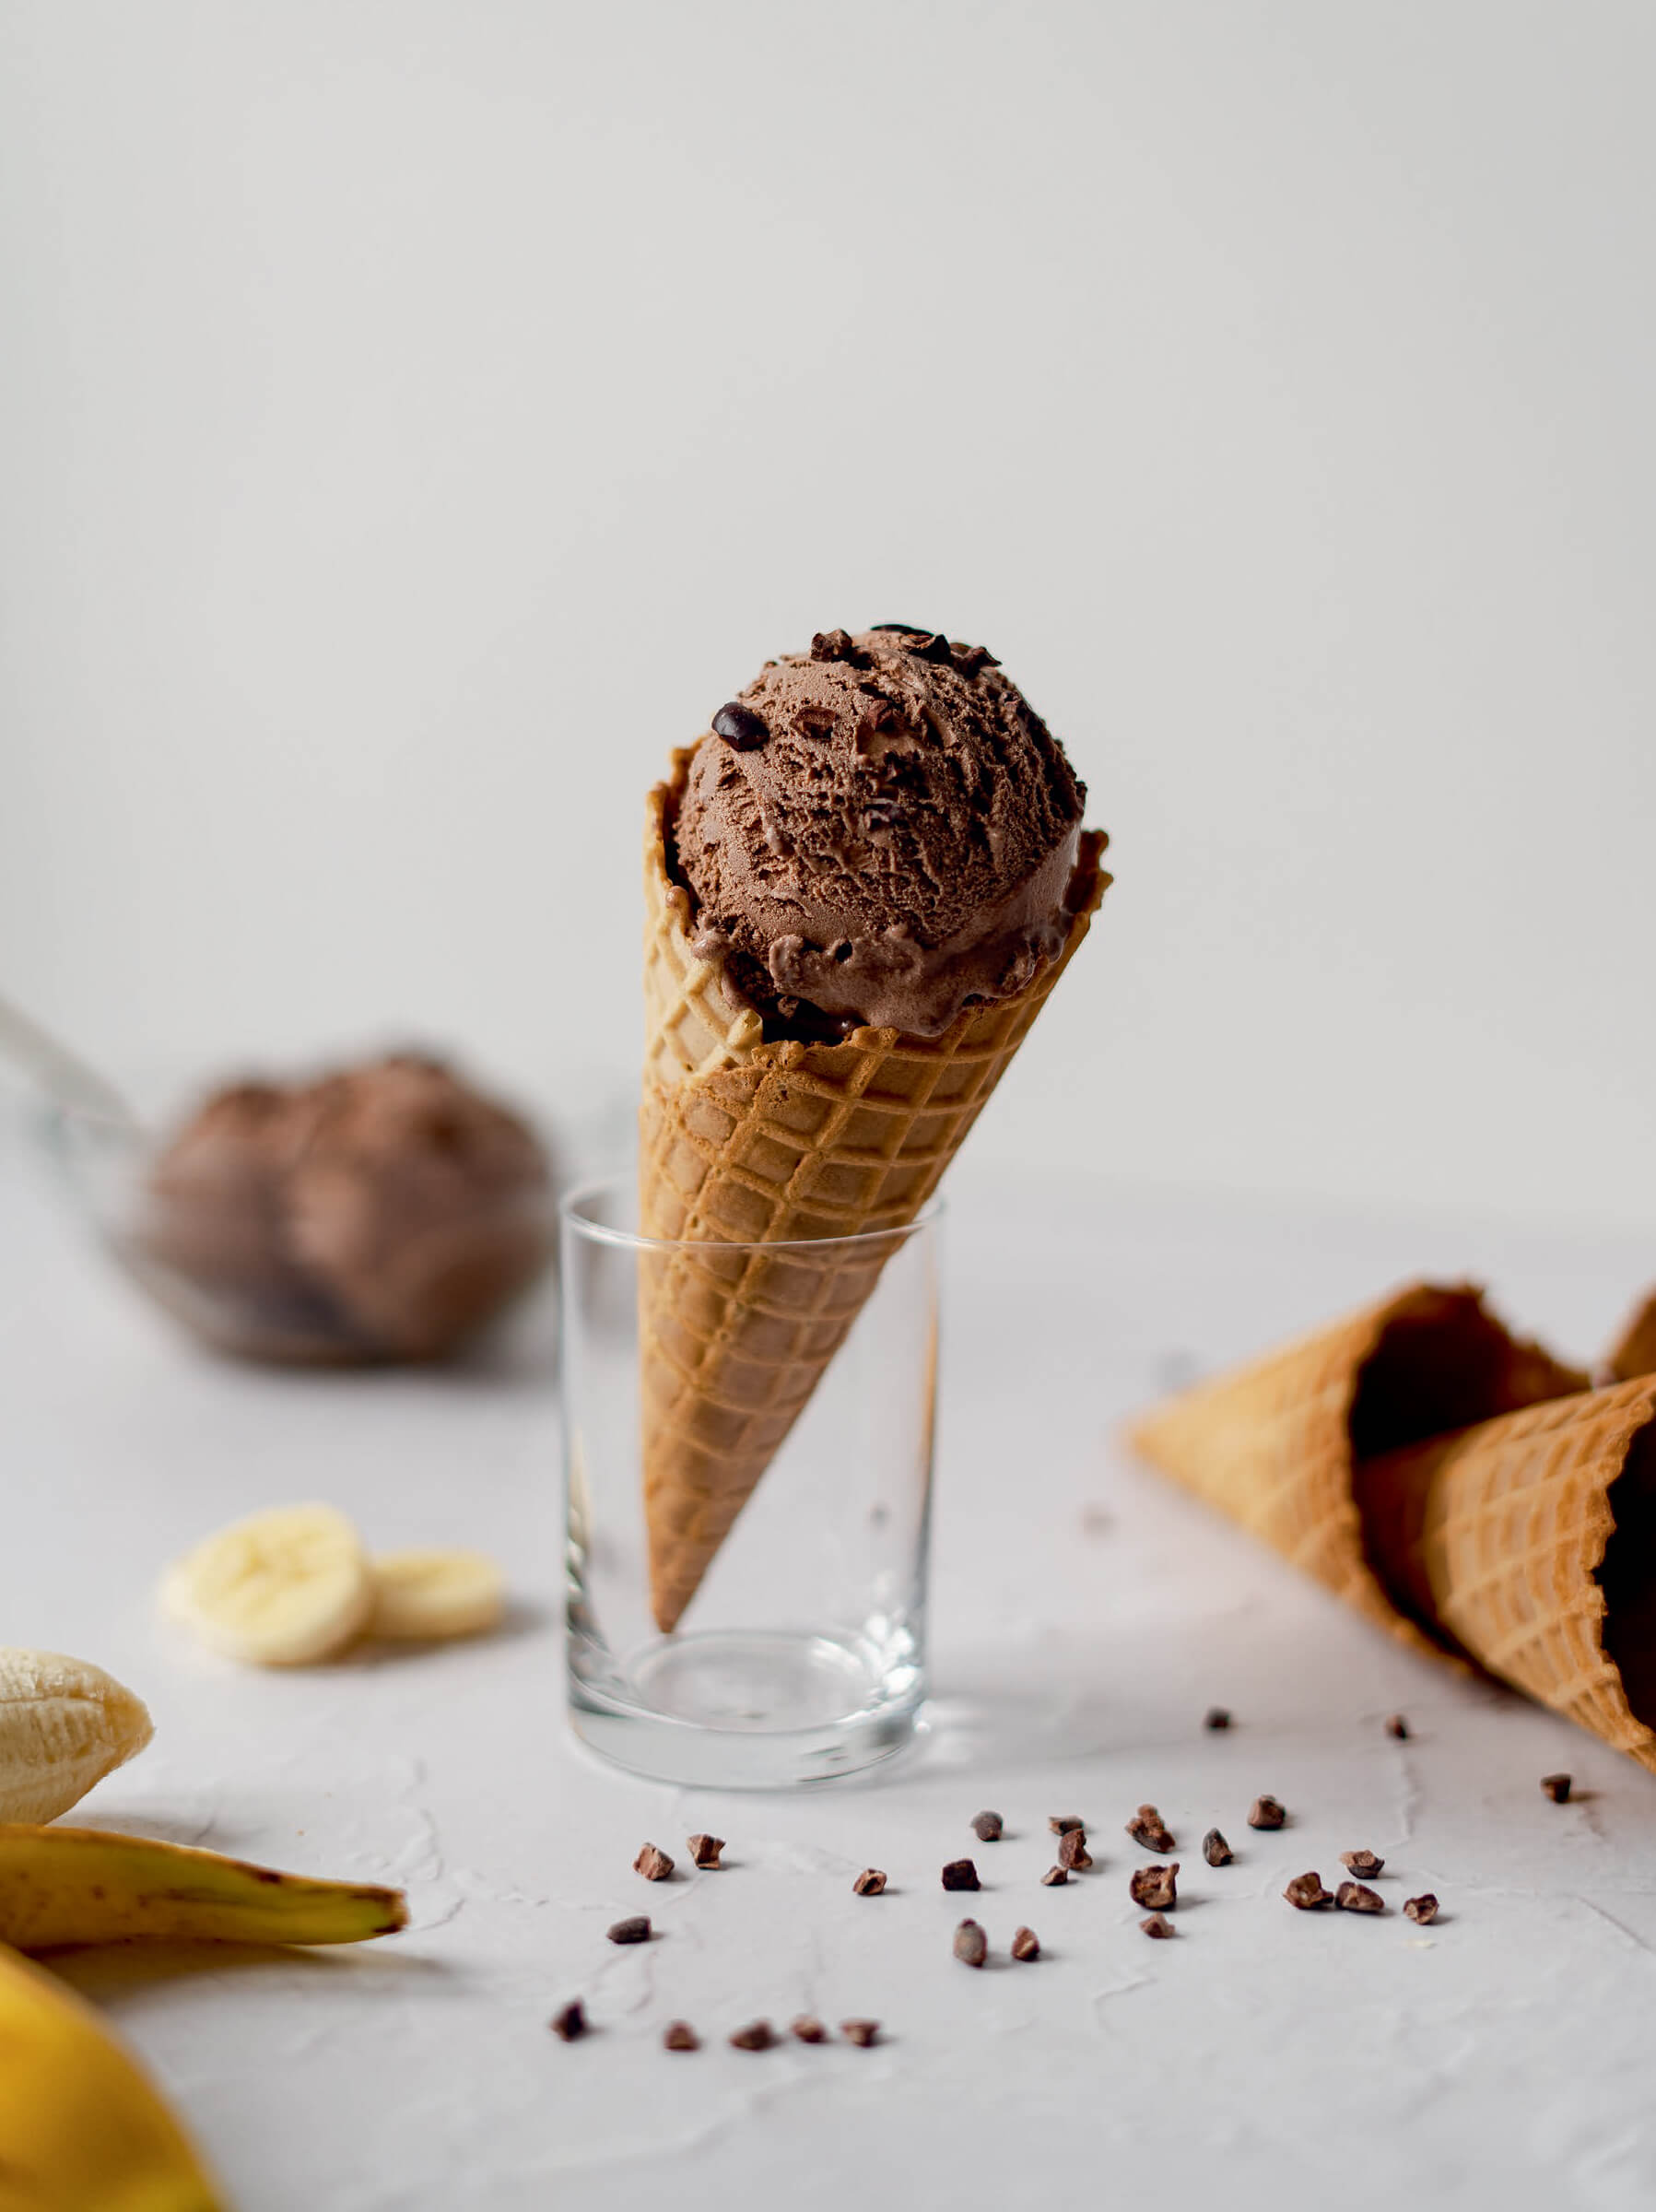 A chocolate ice cream cone resting in a glass with sliced bananas and other ingredients scattered nearby